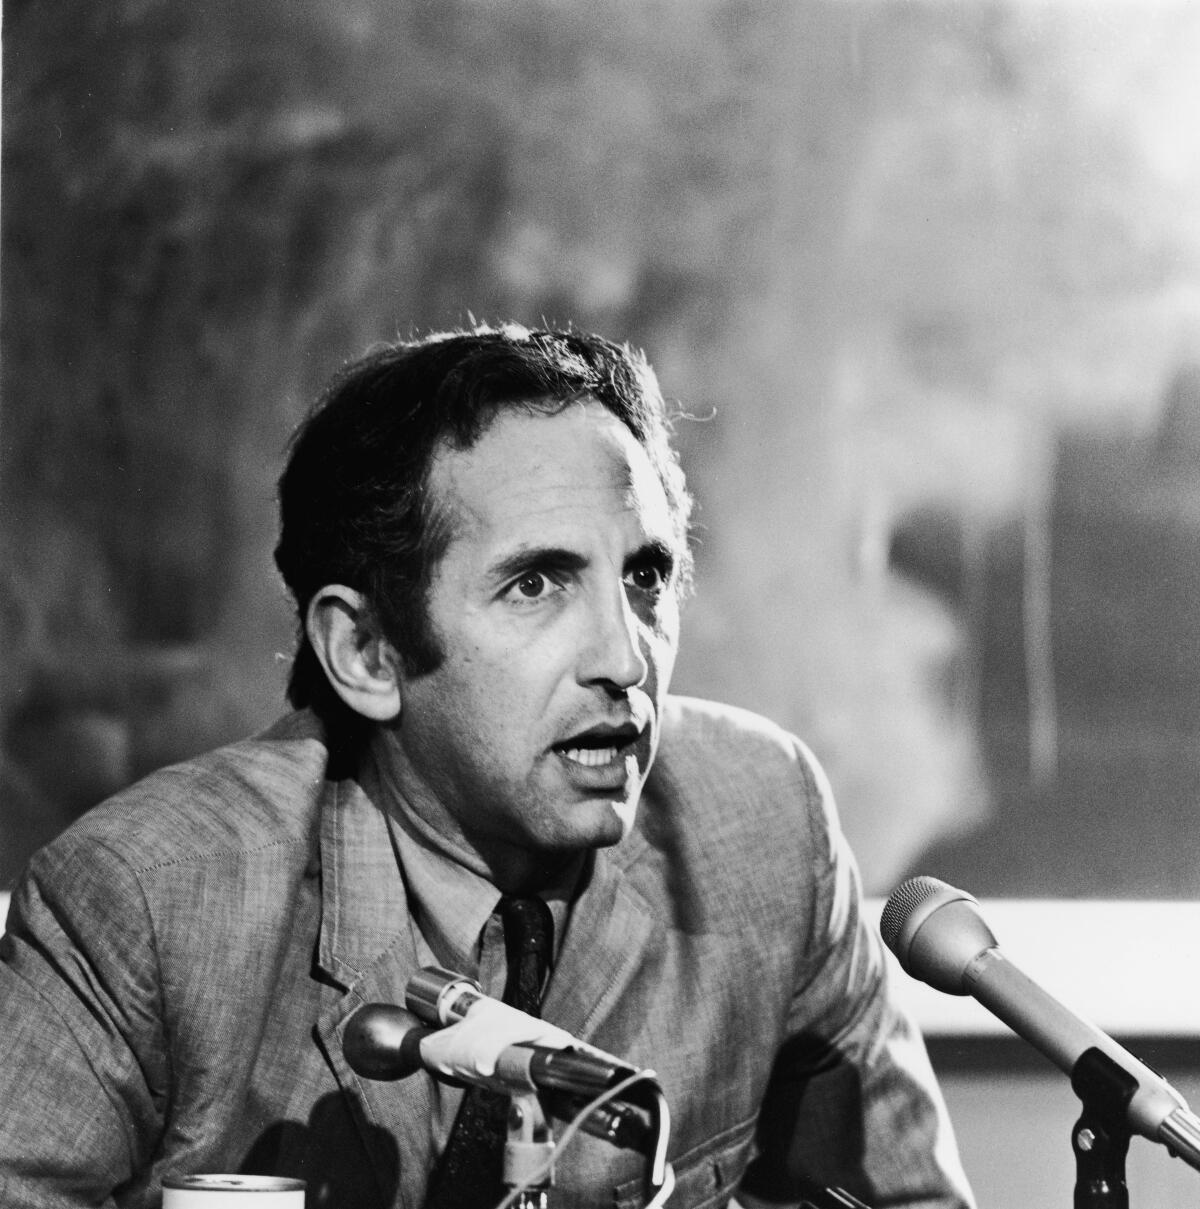 Ellsberg speaks at a news conference in the 1970s.